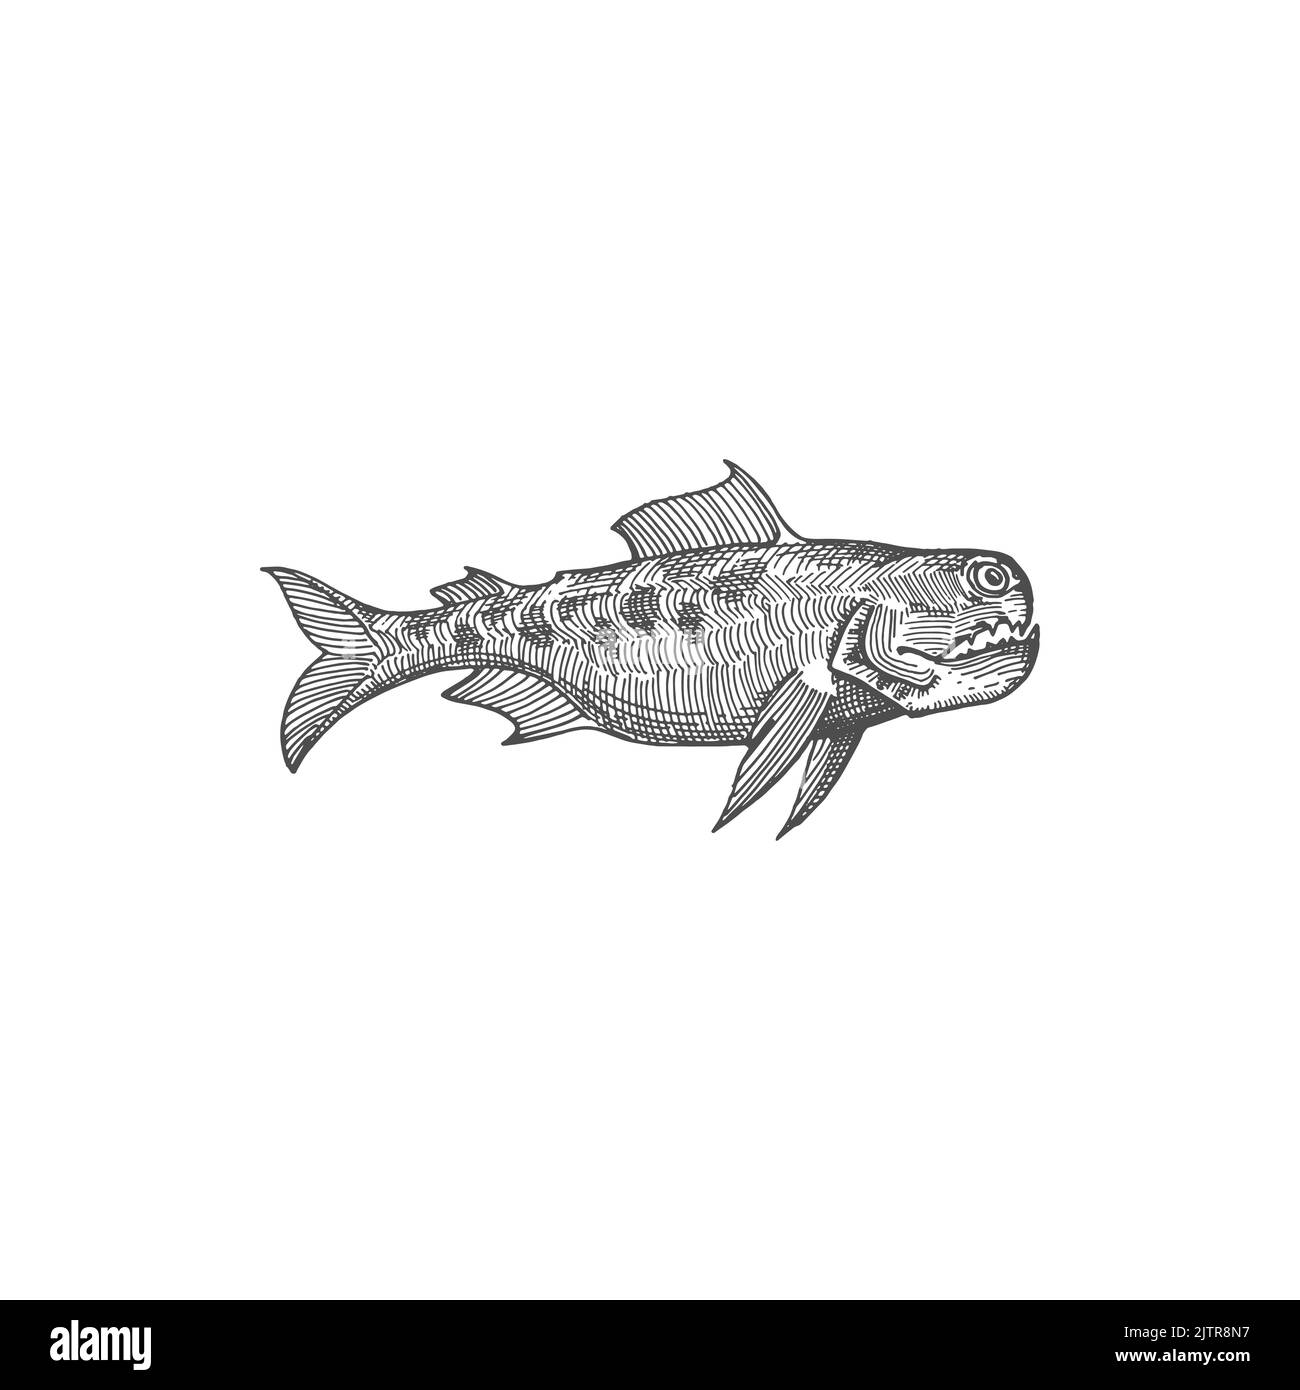 Fangtooth fish isolated monochrome sketch icon. Vector deep ocean or sea large toothed predator, Anoplogaster Cornuta. Black Dragonfish, Long-Nosed Chimaera, Blobfish, Hatchet Fish, Giant Oarfish Stock Vector